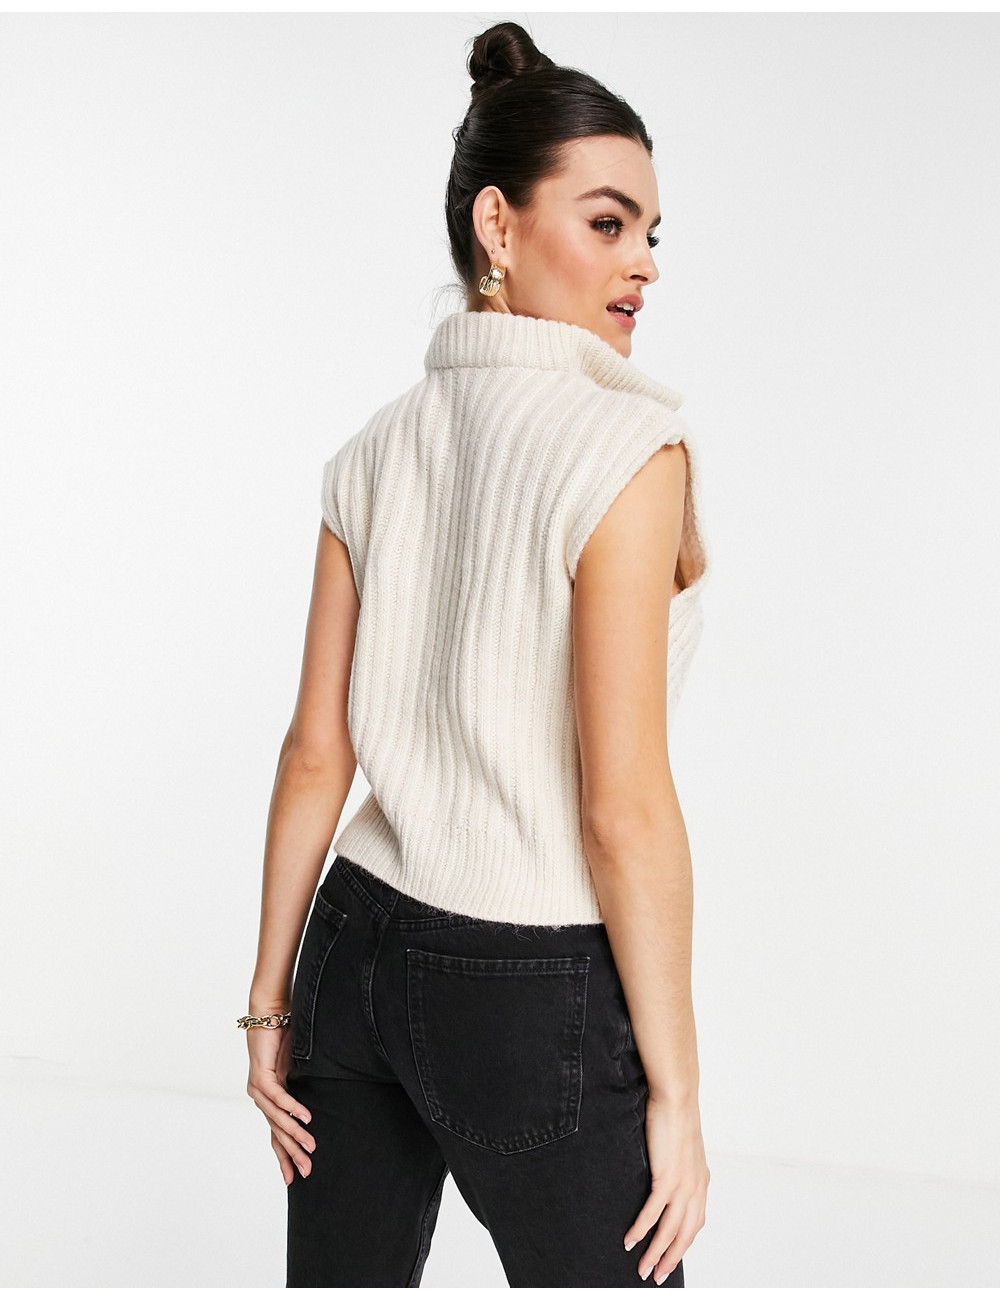 Mango zip top cable knit...